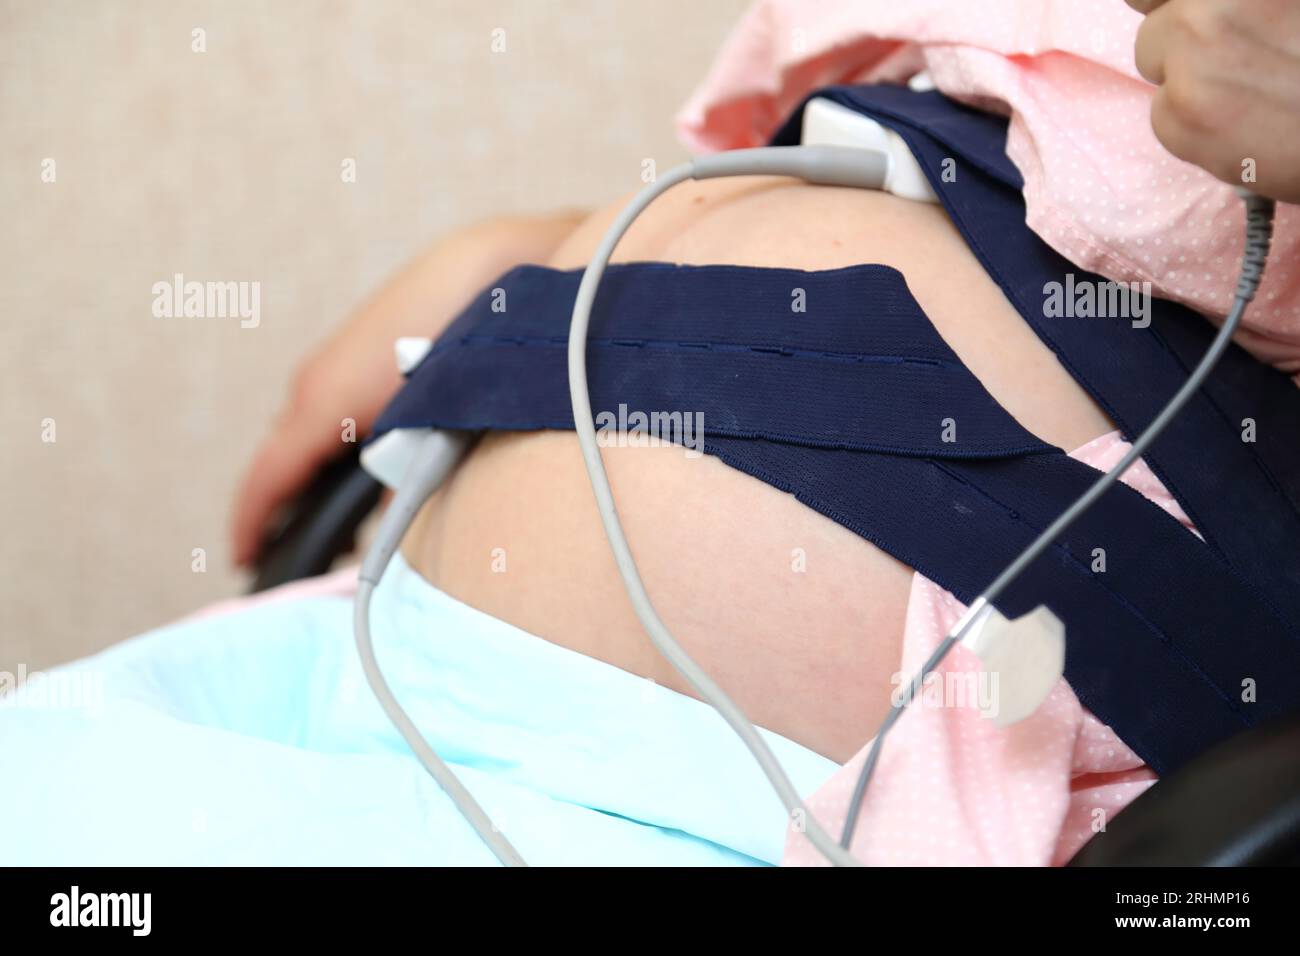 Achtung, Baby: This Wireless Fetal Heart Rate Monitor Delivers